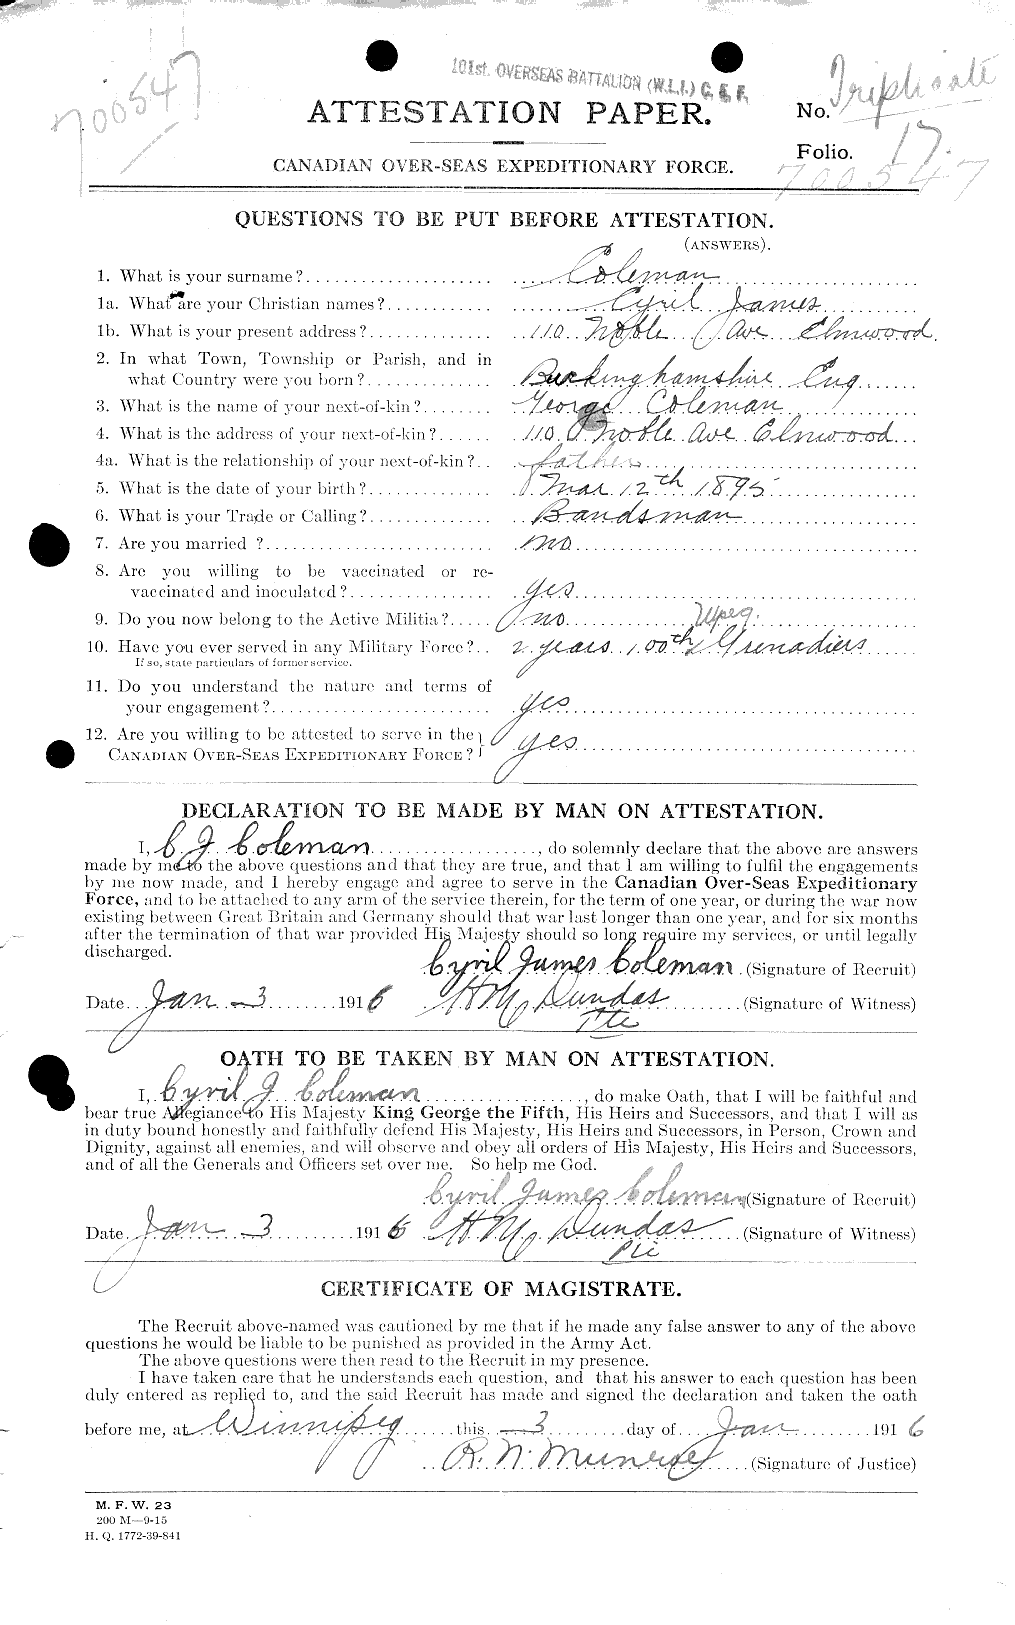 Personnel Records of the First World War - CEF 028094a